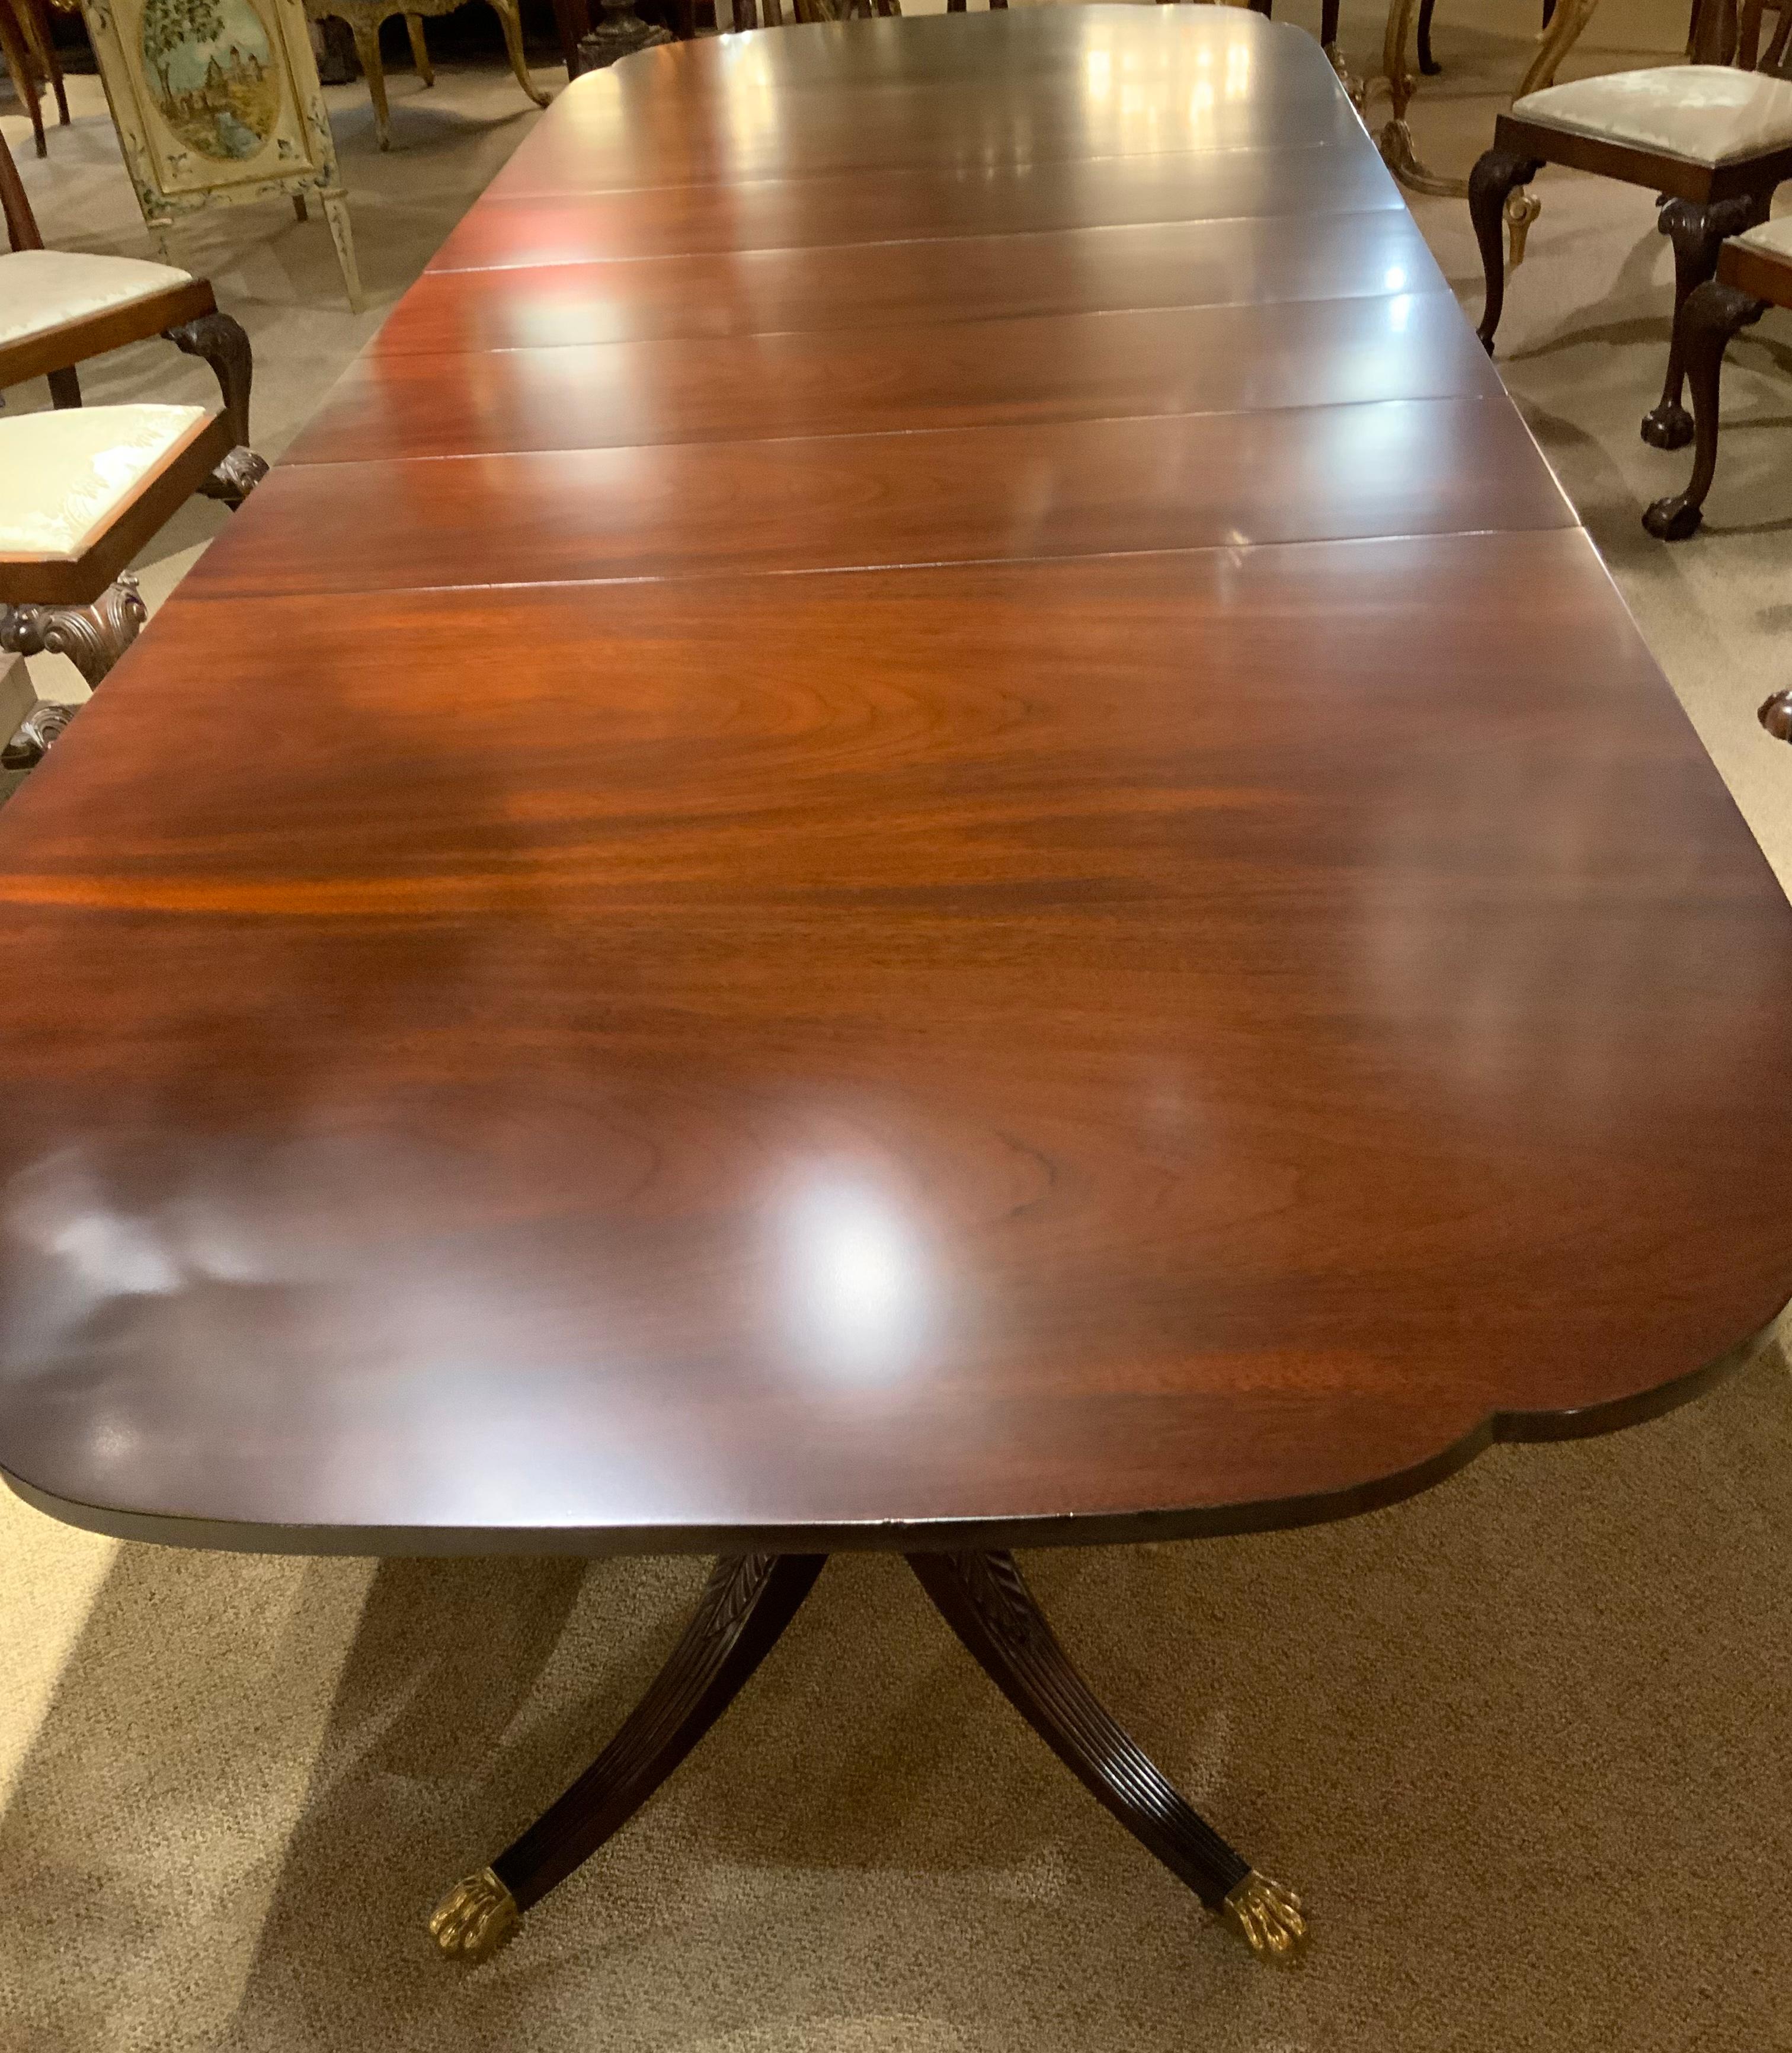 George III Mahogany double pedestal george III - style dining table with four leaves